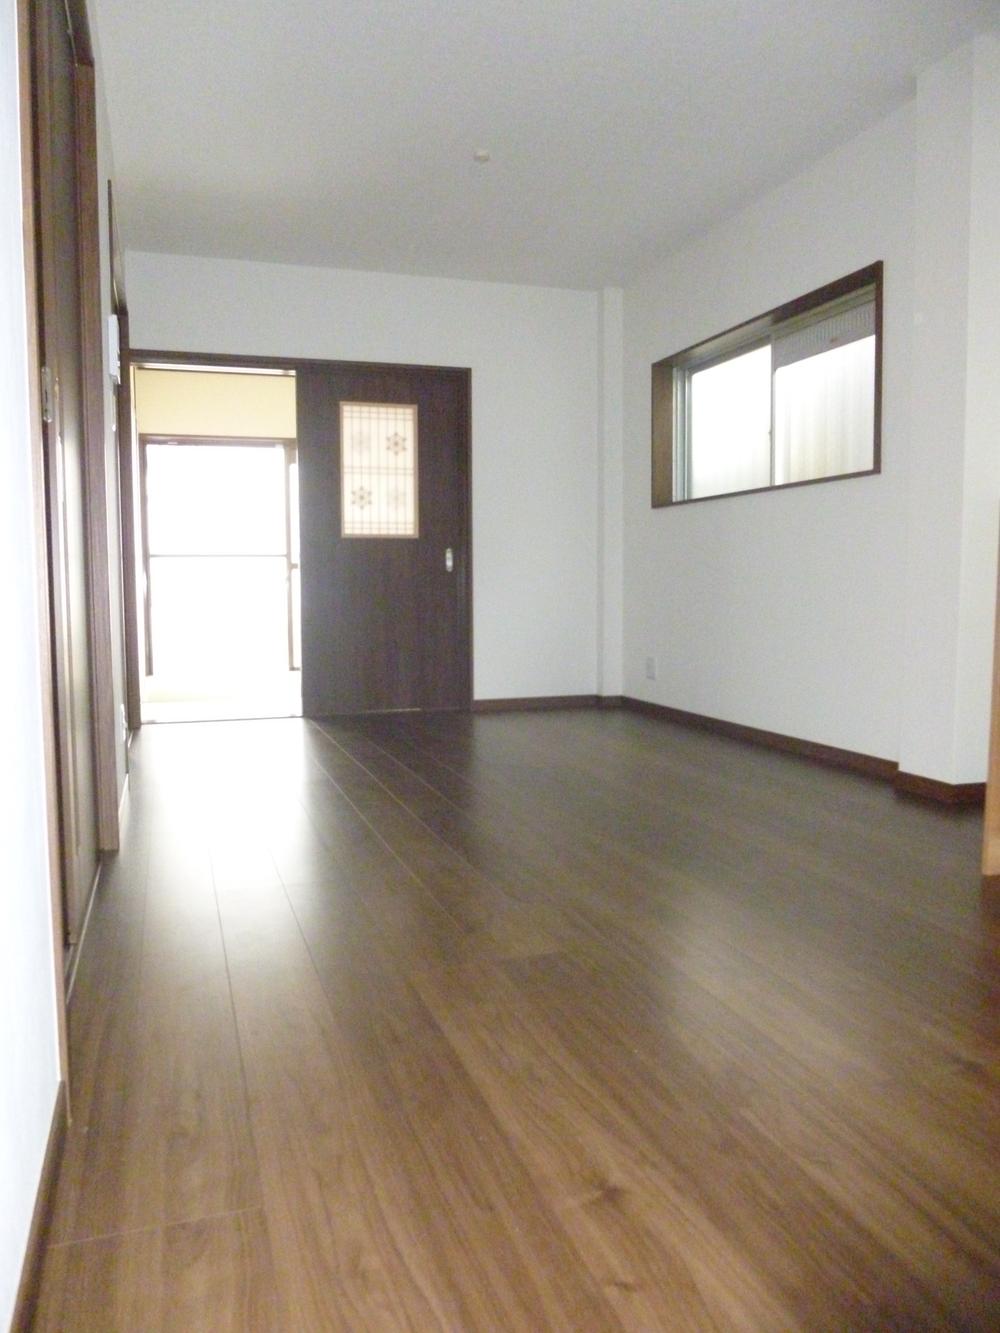 Non-living room. After all, bright and open the Japanese-style door